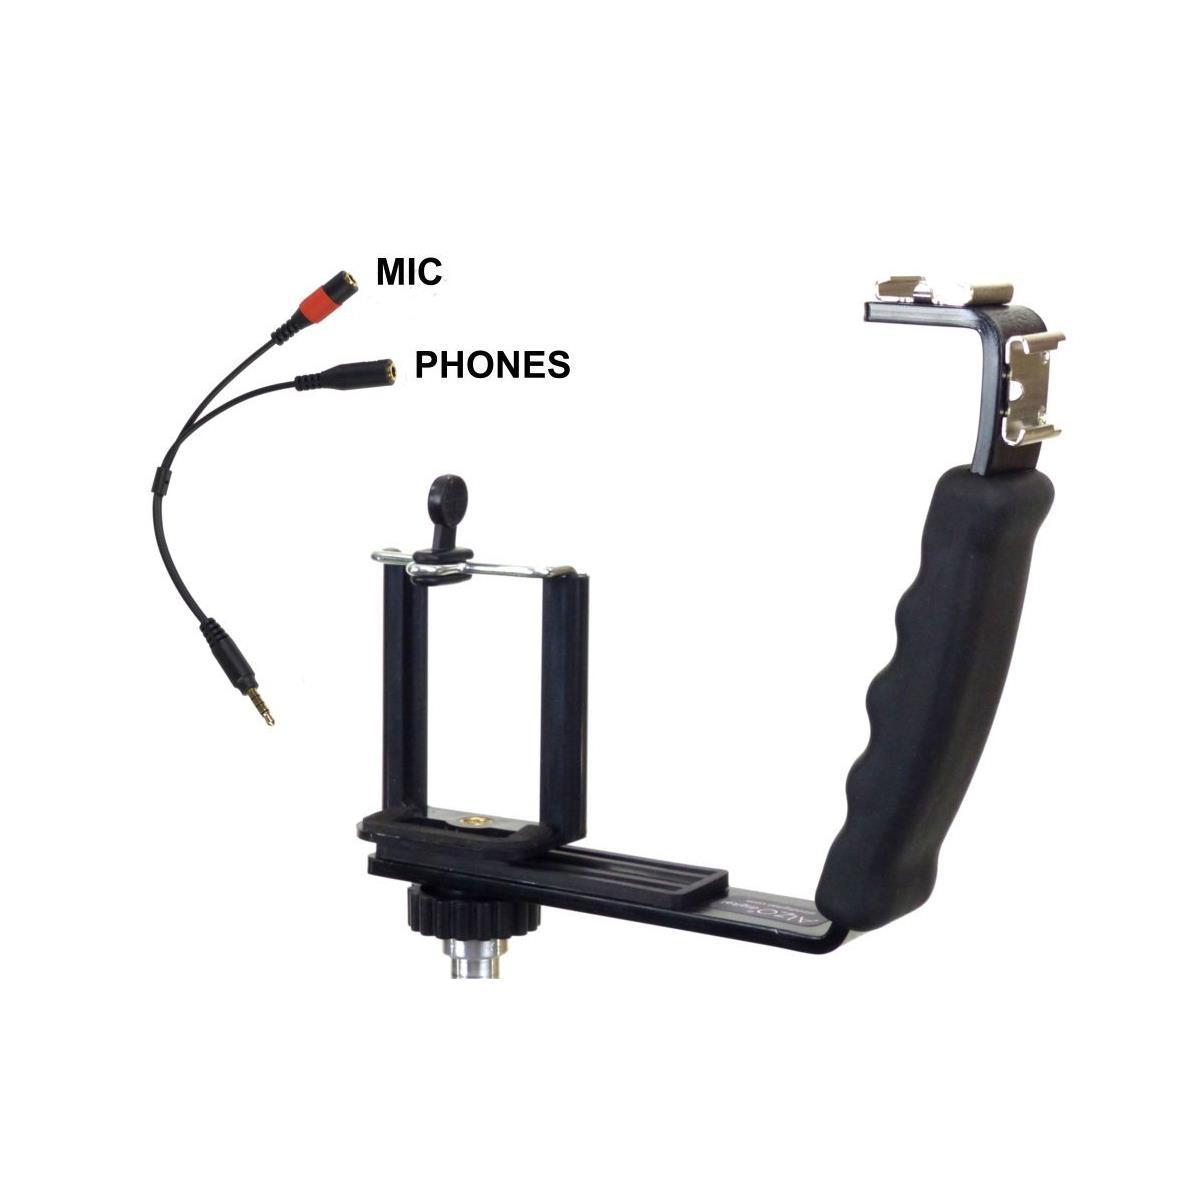 Image of Alzo Digital Streaming Video Rig with Mic Headphone Breakout Cord for Smartphone